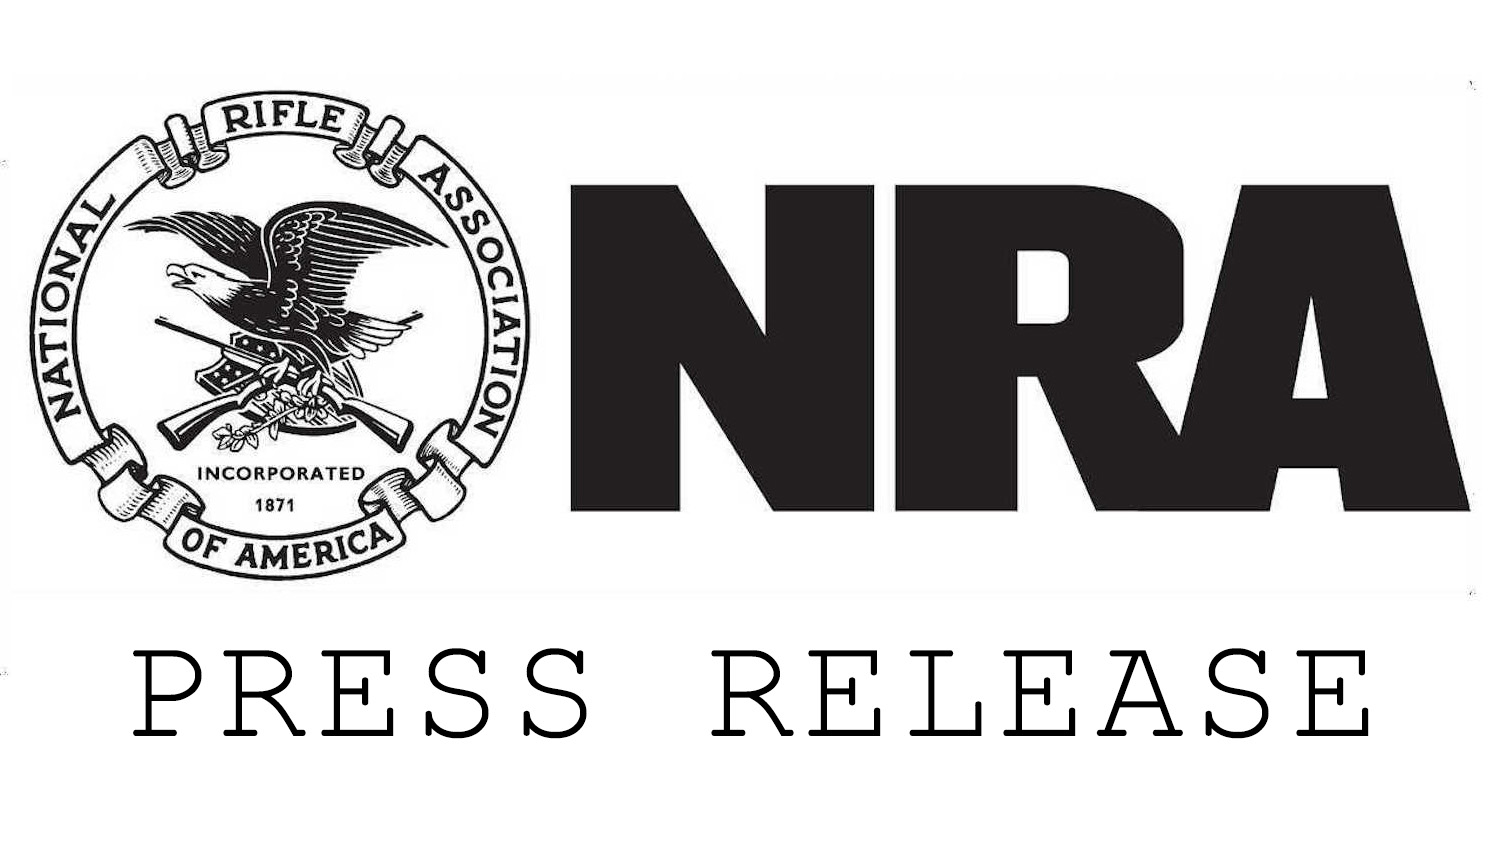 Registration Now Open For The 2018 NRA World Shooting Championship Presented by Kimber